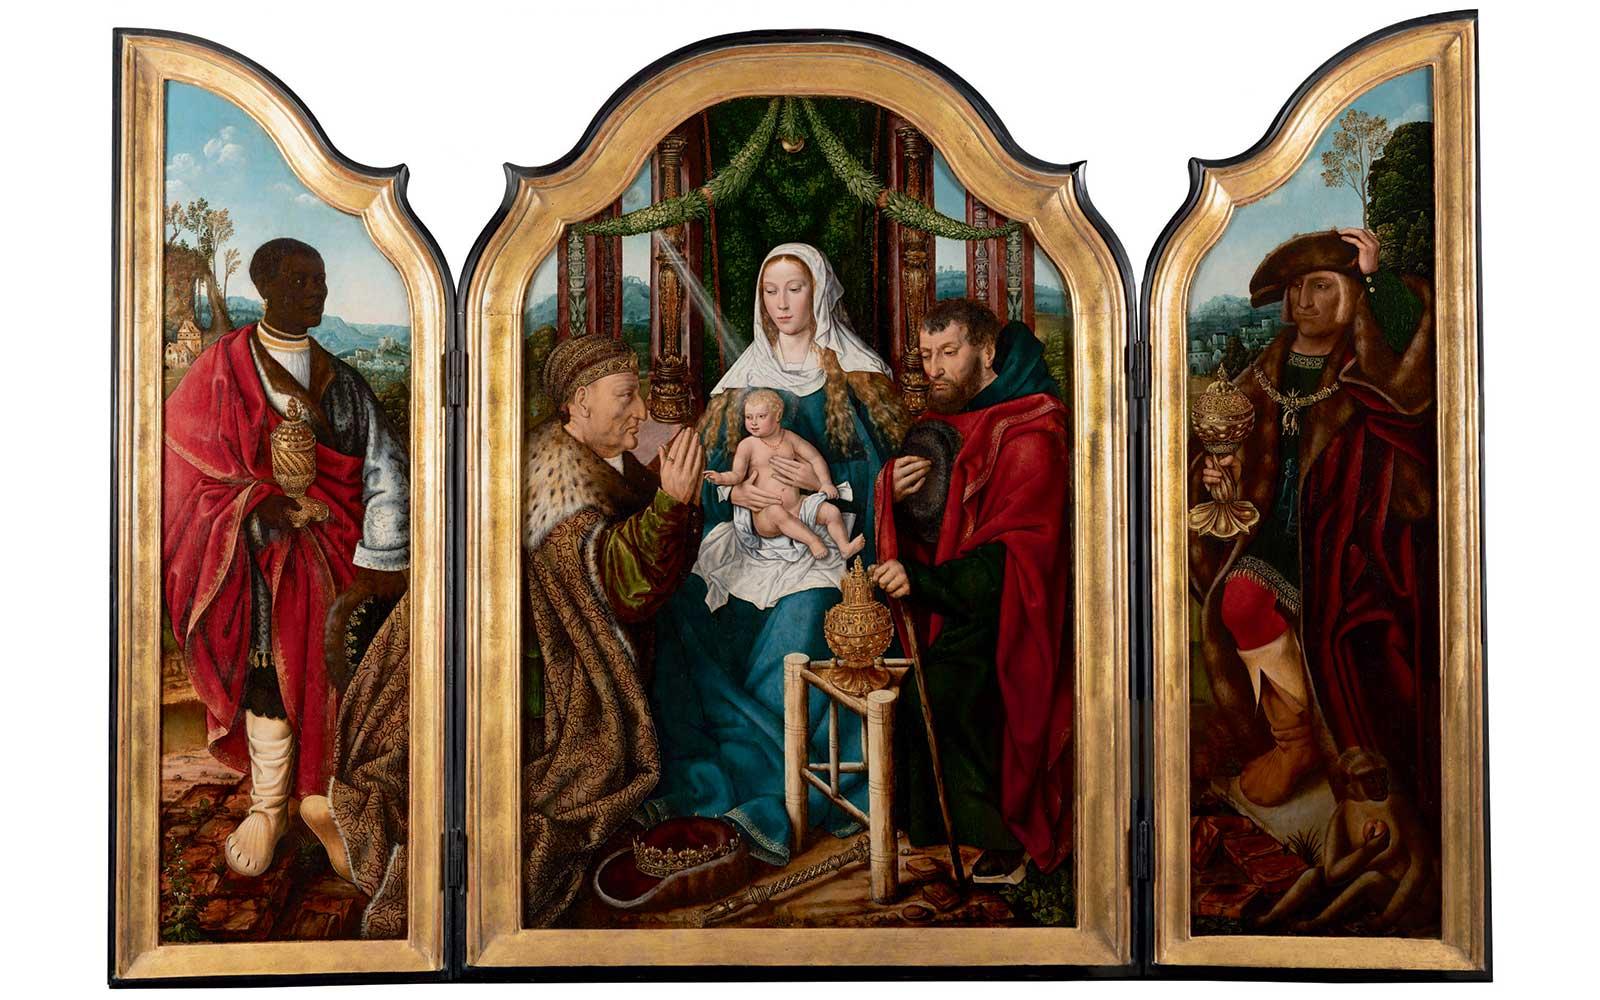 Master of Frankfurt and Workshop, The Adoration of the Magi with Emperor Frederick III and Emperor Maximilian, about 1510– 20. 